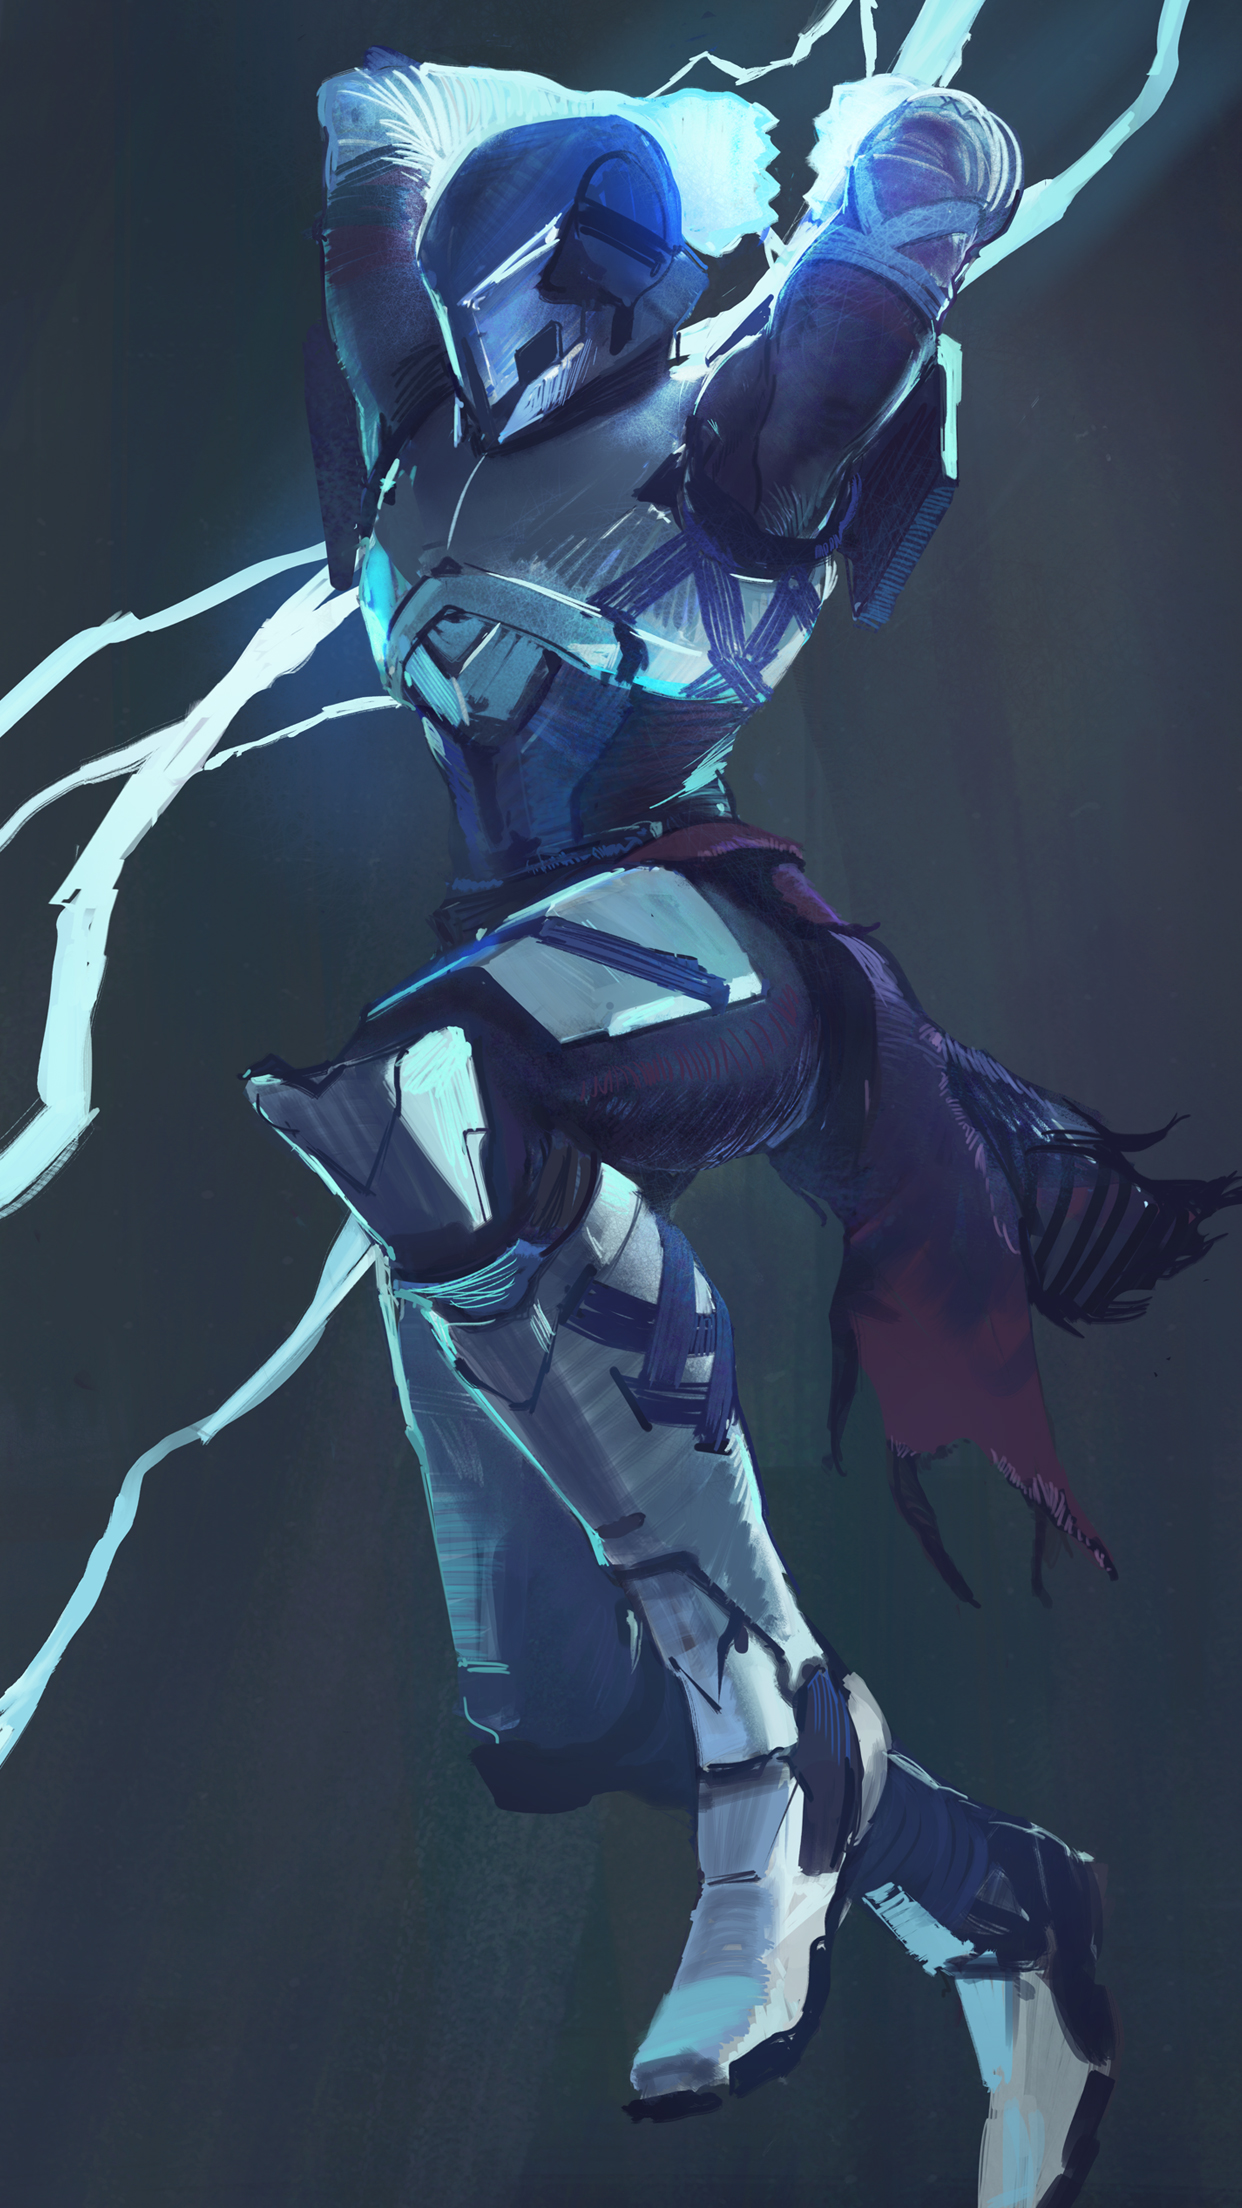 Stylized Destiny 2 character art for mobile wallpaper featuring a Guardian with dynamic lighting effects.